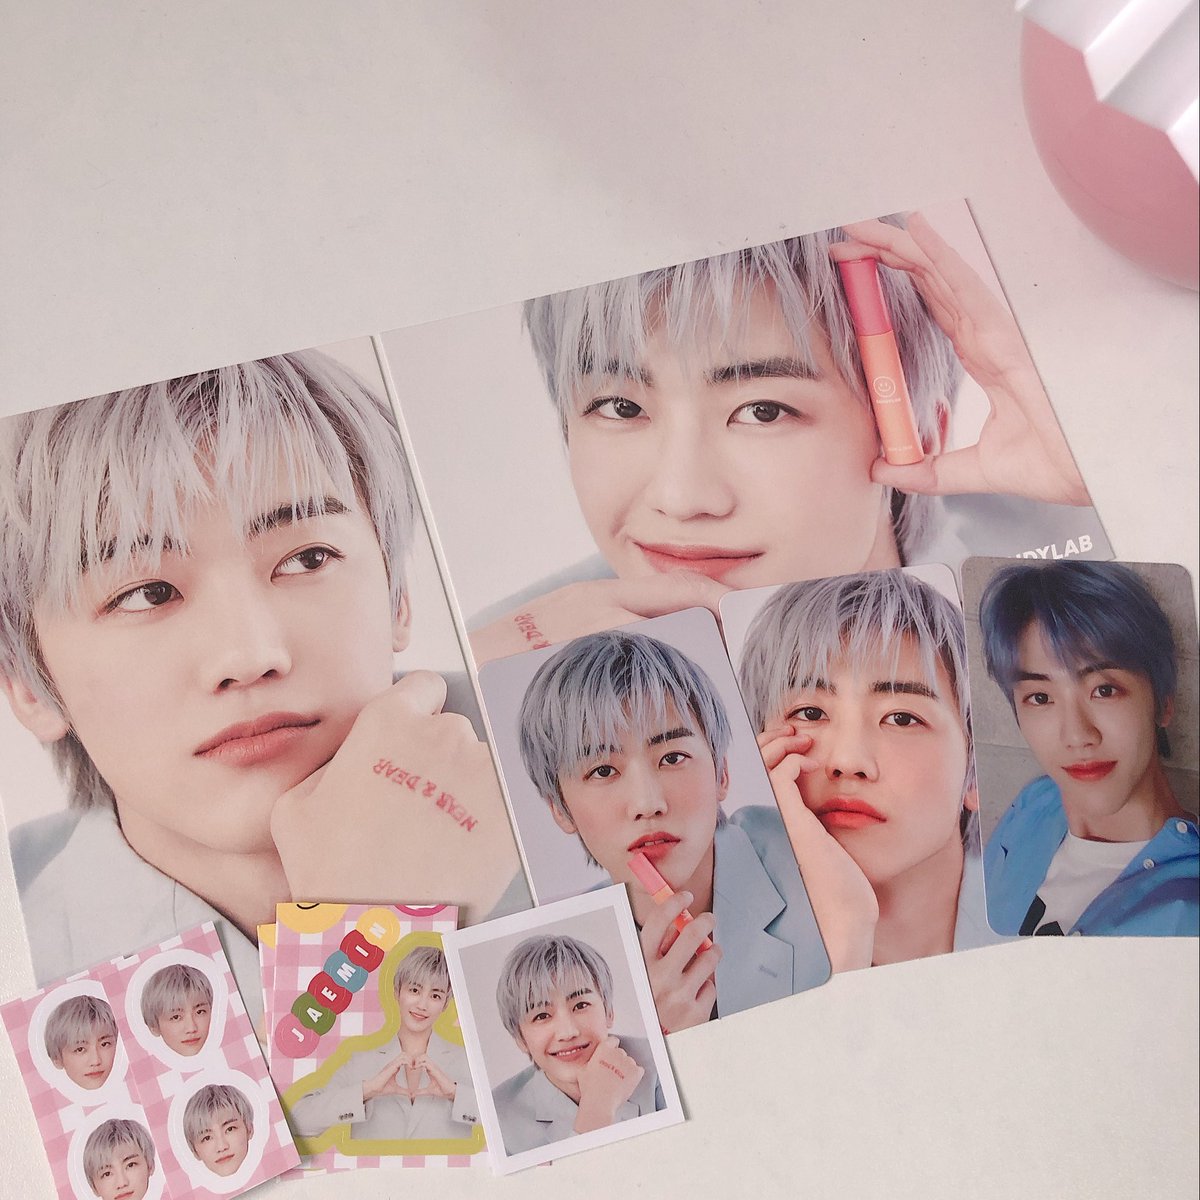 it’s been a while since i last updated this thread oof but anw im so happy i finally got my hands on jaemin’s candylab set  been looking for these for a while now so a super big thank you to  @NeoCityMNL for this set!! it was packaged really well   #NeoCityMNLFB